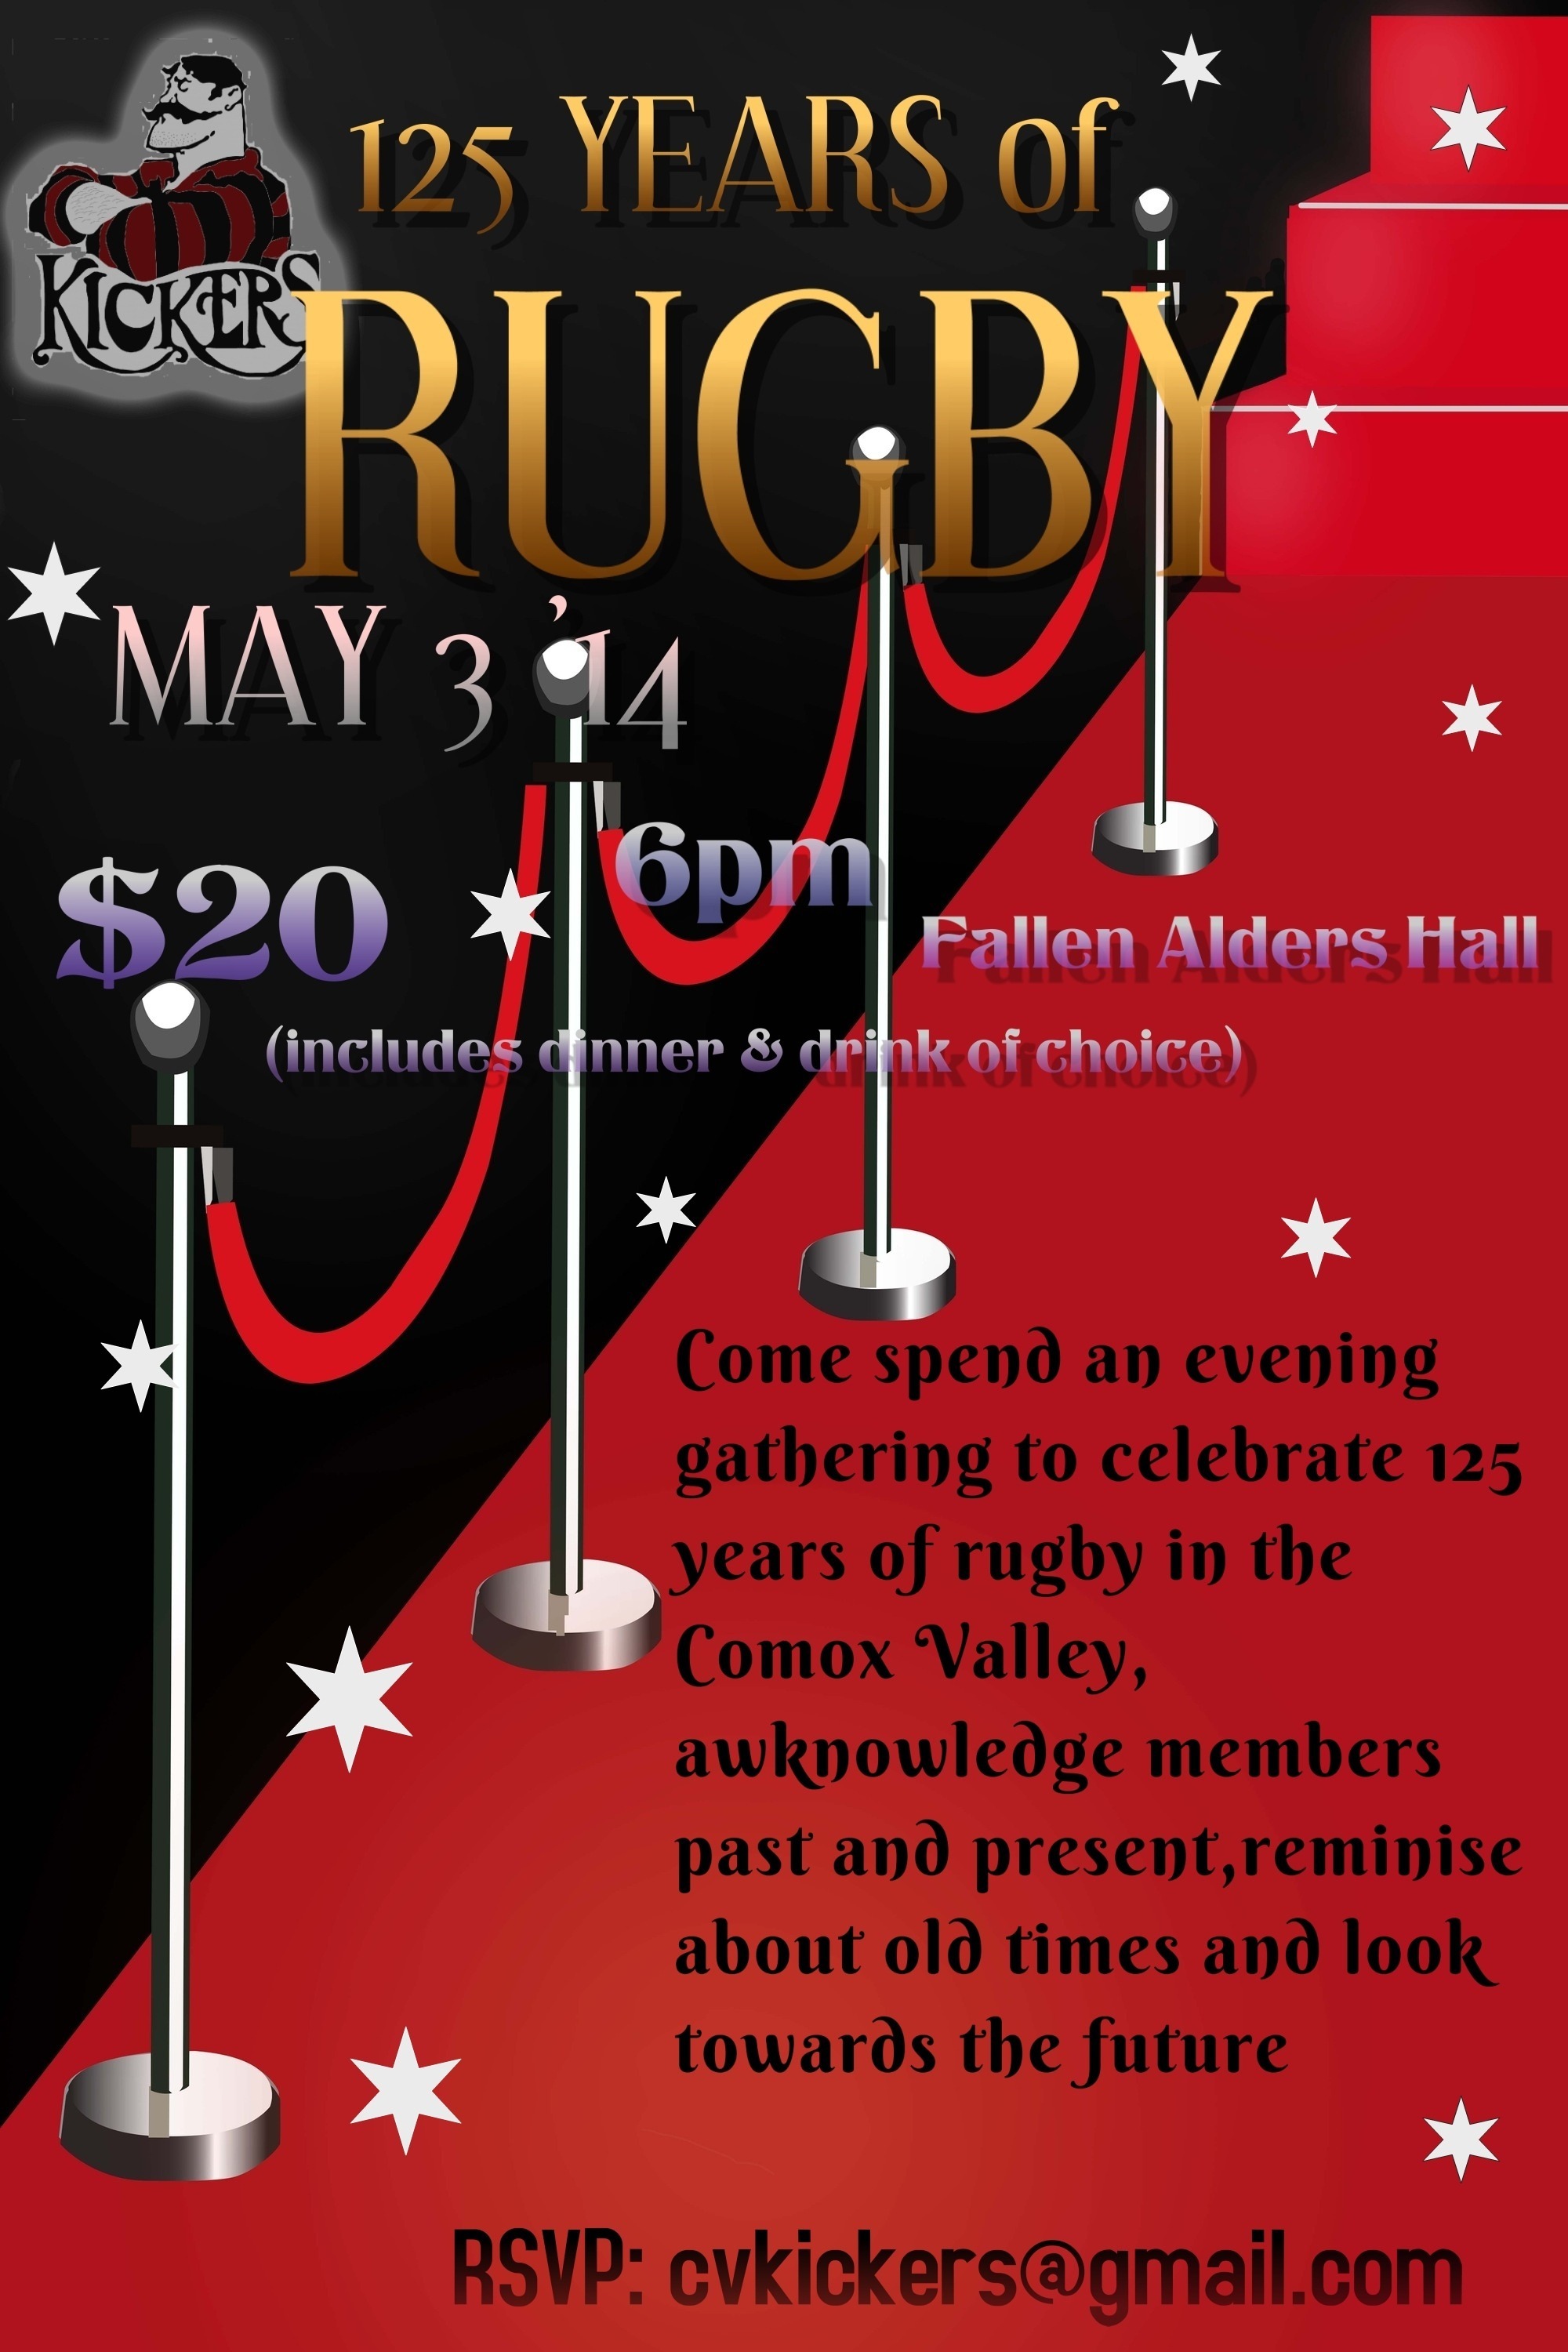 Kickers Annual Awards Banquet and 125 Years of Rugby!